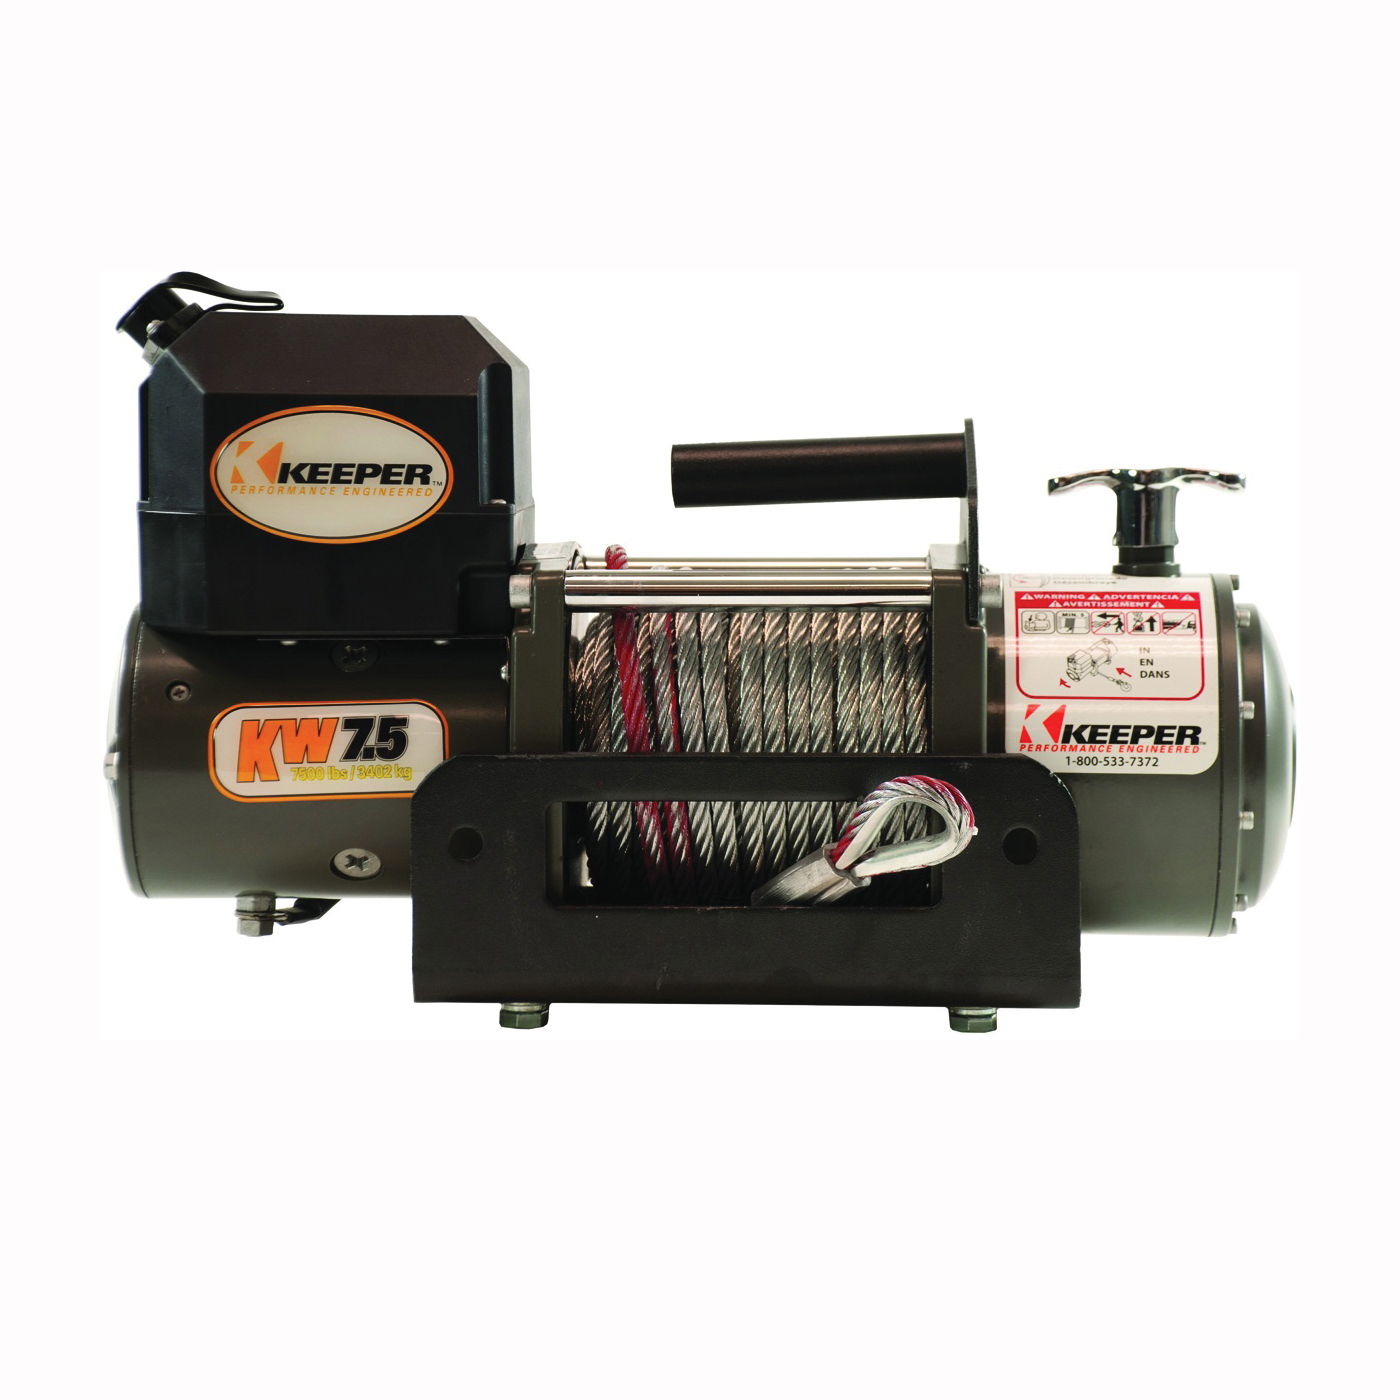 KW75122RM Winch, Electric, 12 VDC, 7500 lb